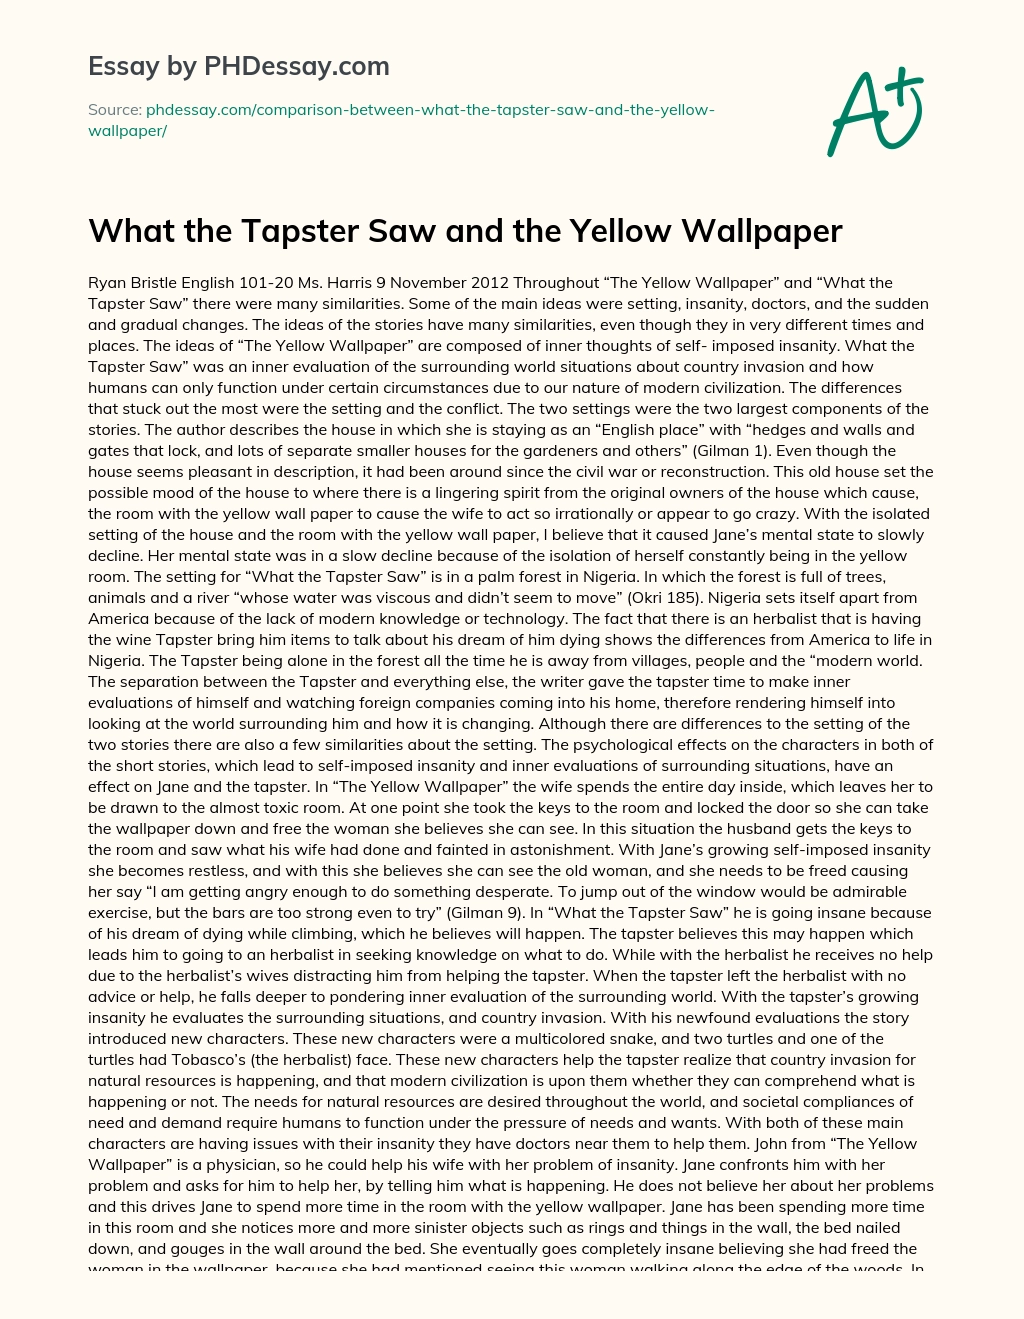 What the Tapster Saw and the Yellow Wallpaper essay